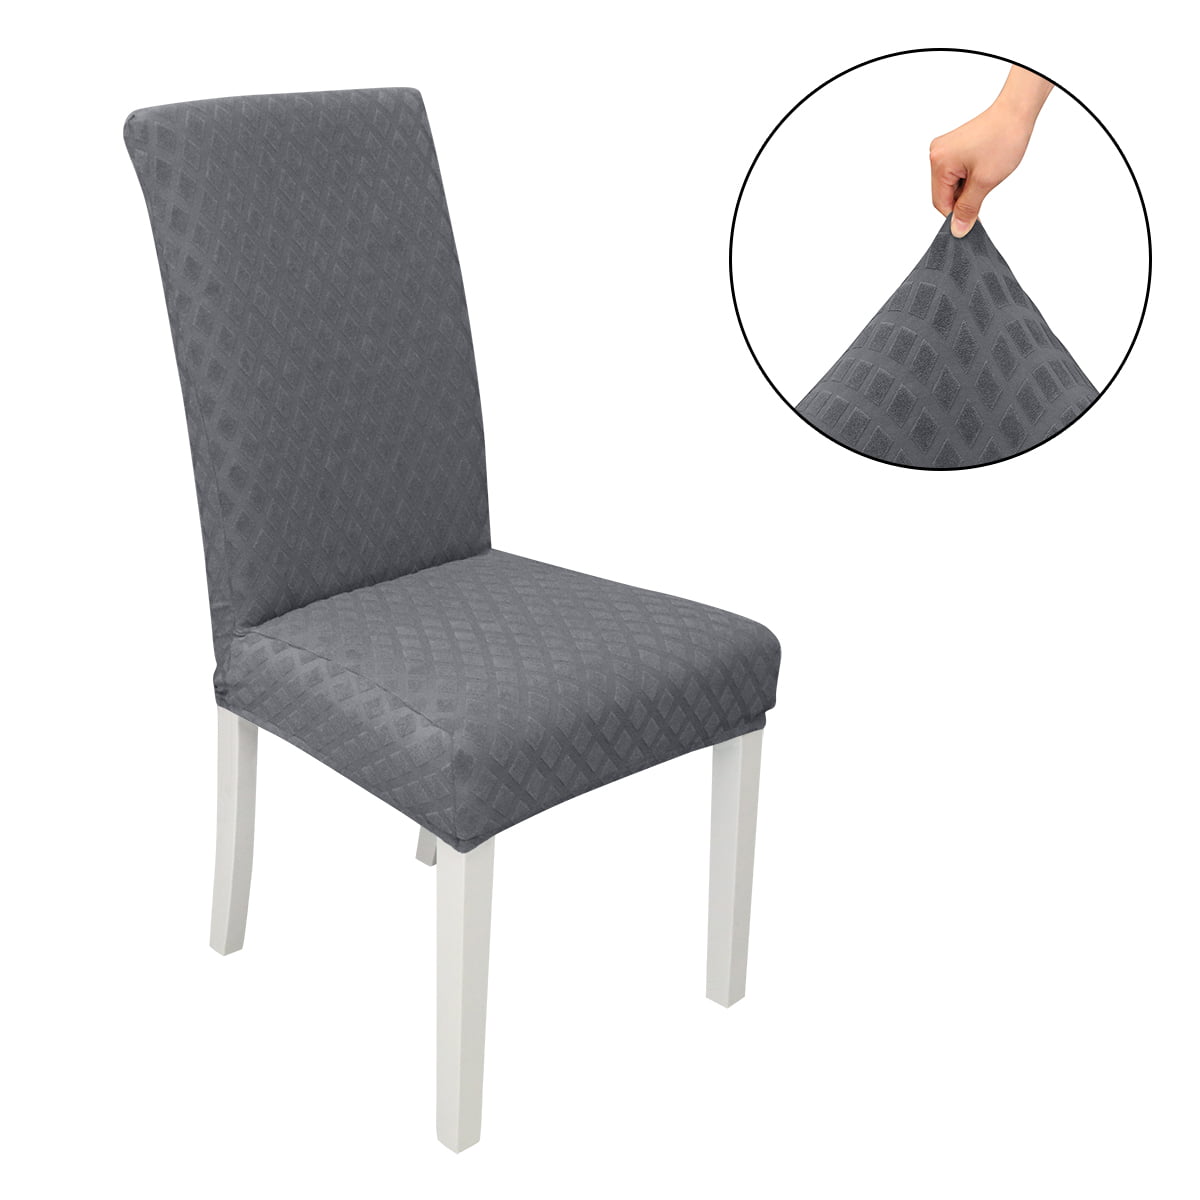 Details about   Soft Slipcover Dining Room Elastic Stretch Jacquard Bench Cover Diamond Pattern 